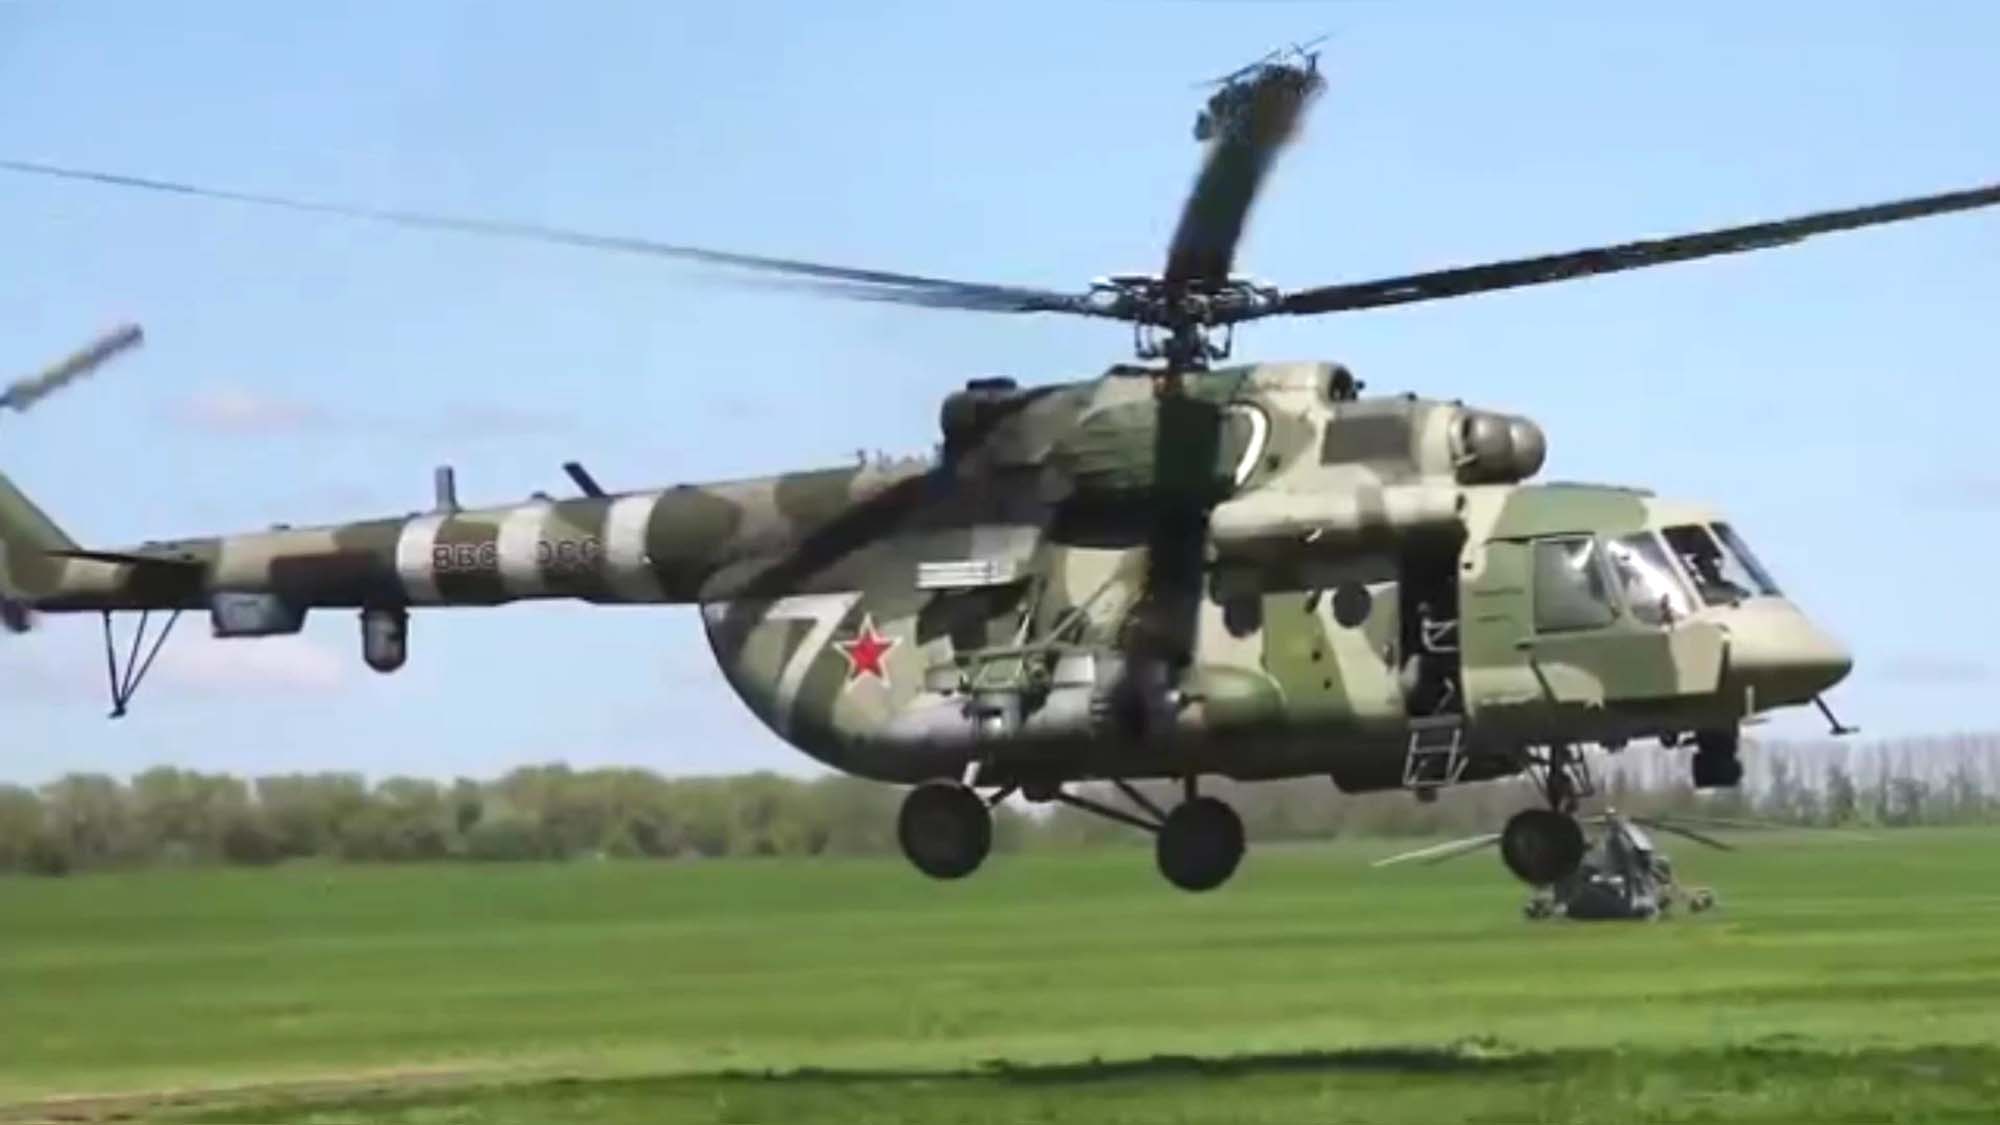 Read more about the article WAR IN UKRAINE: Russia Claims Footage Shows Attack Helicopters Conducting Electronic Warfare